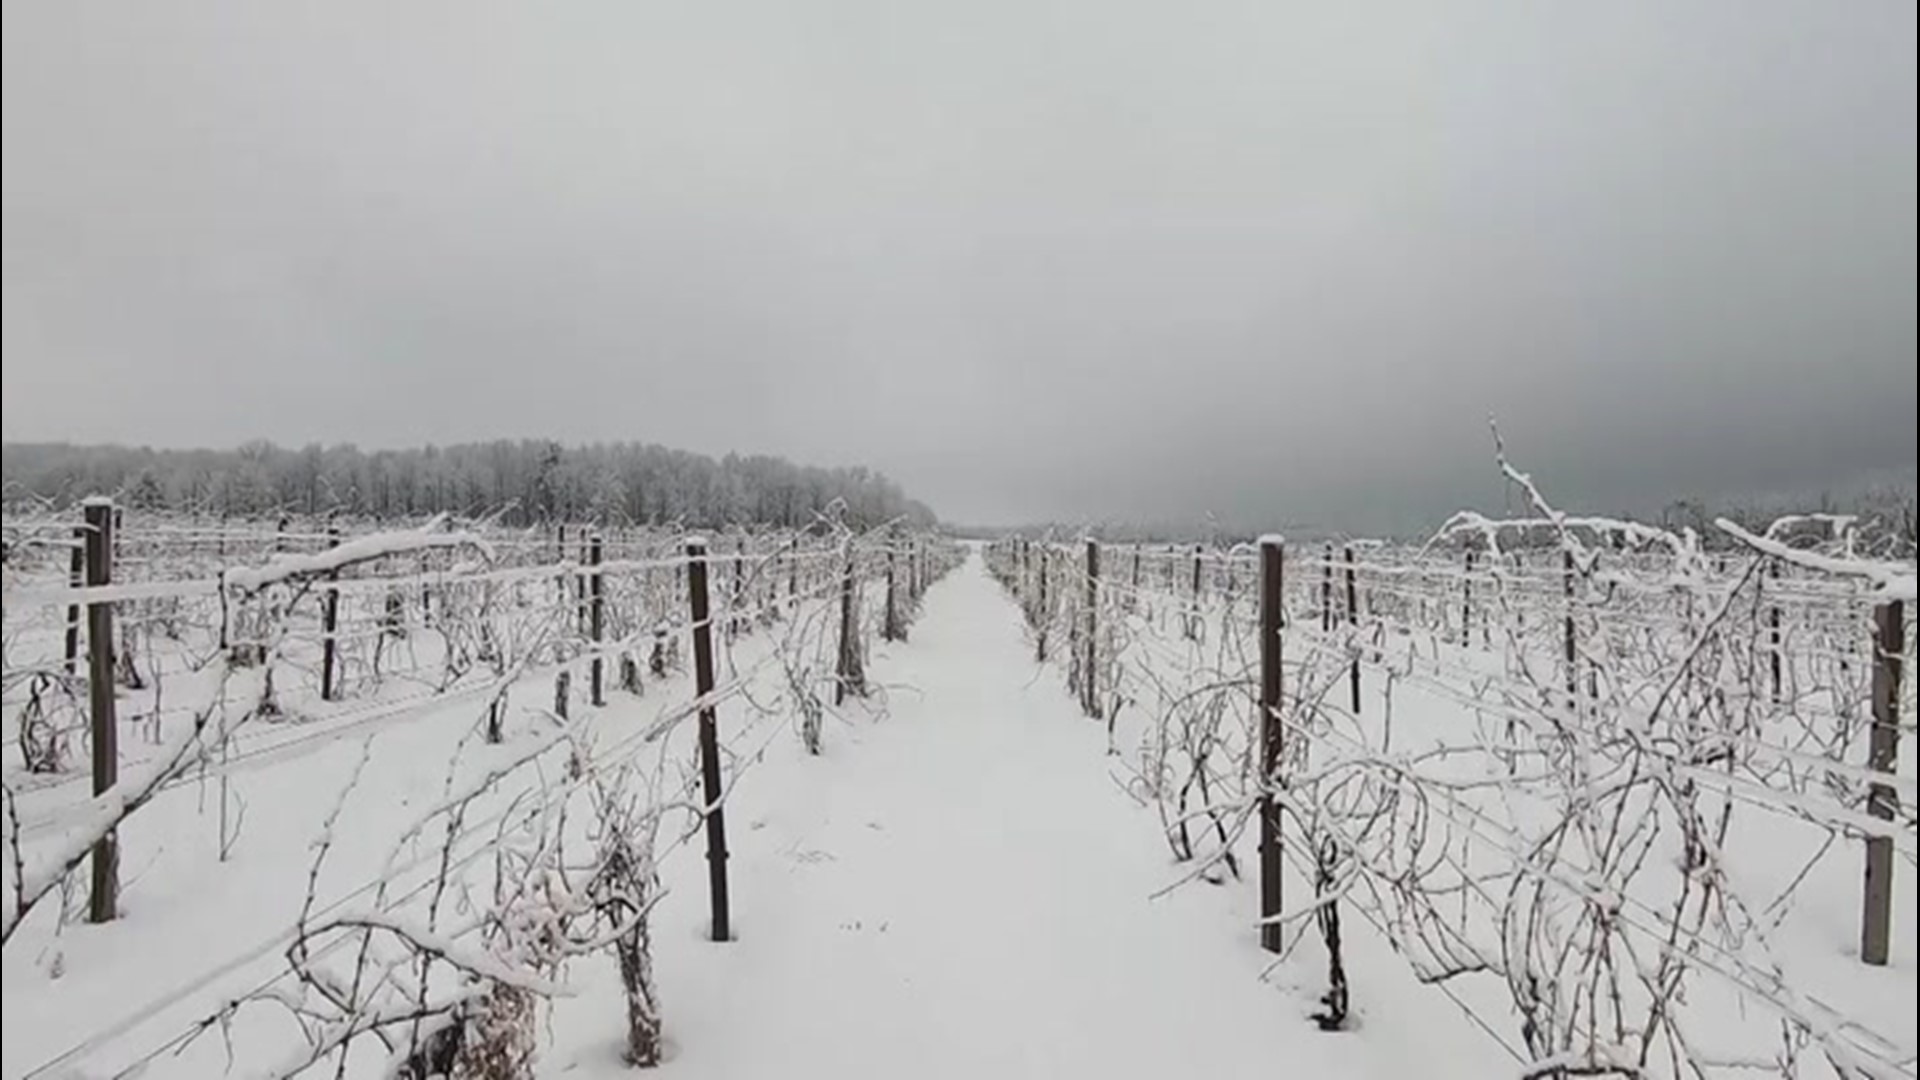 Grape growers in New York's Finger Lakes region had to deal with a major cold front in the area. Accuweather's Dexter Henry took a look at the precautions the vineyards took.